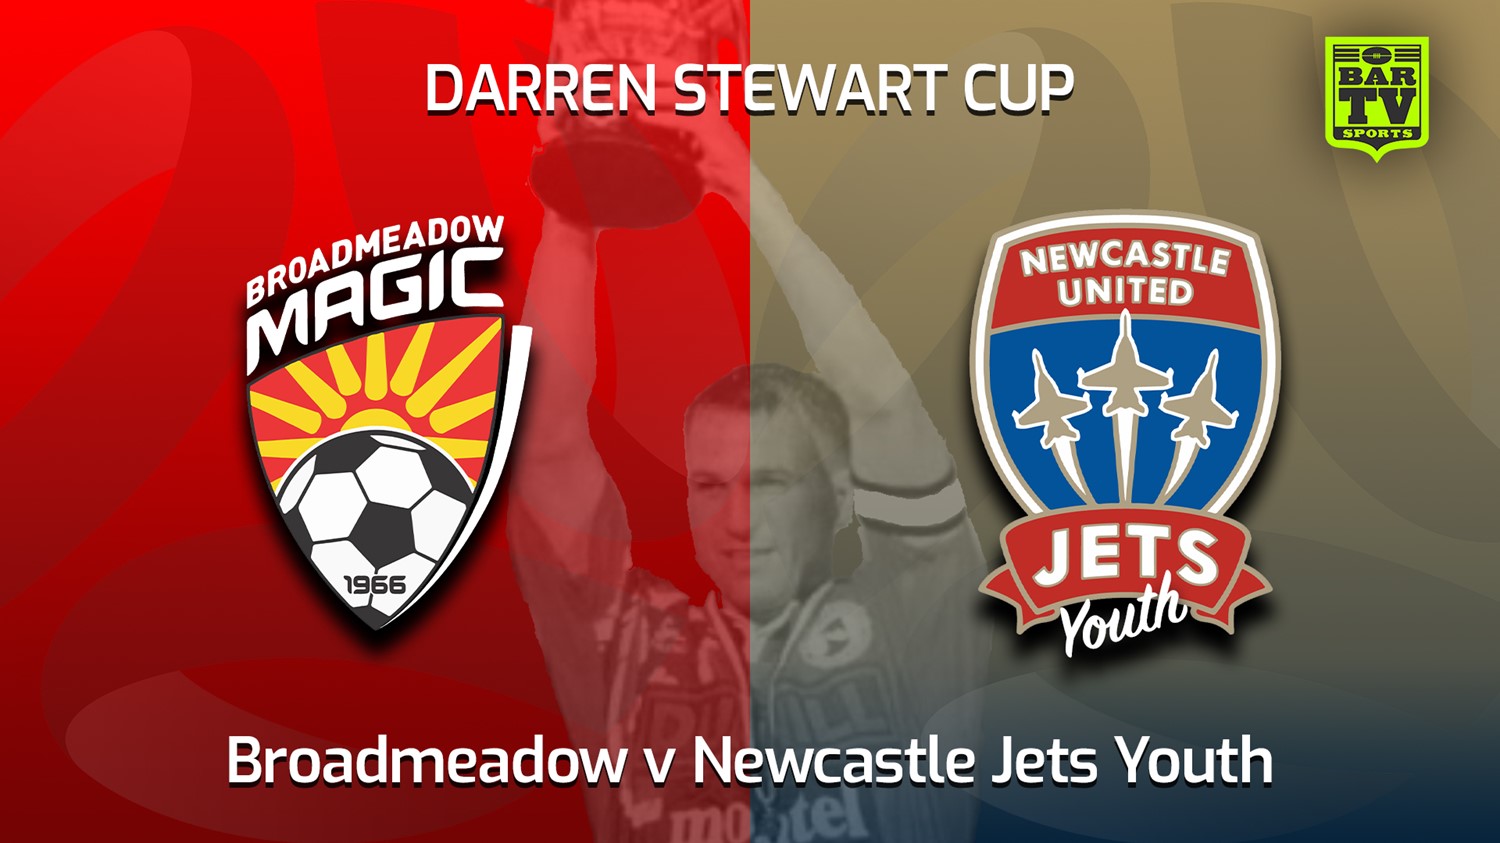 230114-Charity Football TRIAL MATCH - Broadmeadow Magic v Newcastle Jets Youth Minigame Slate Image